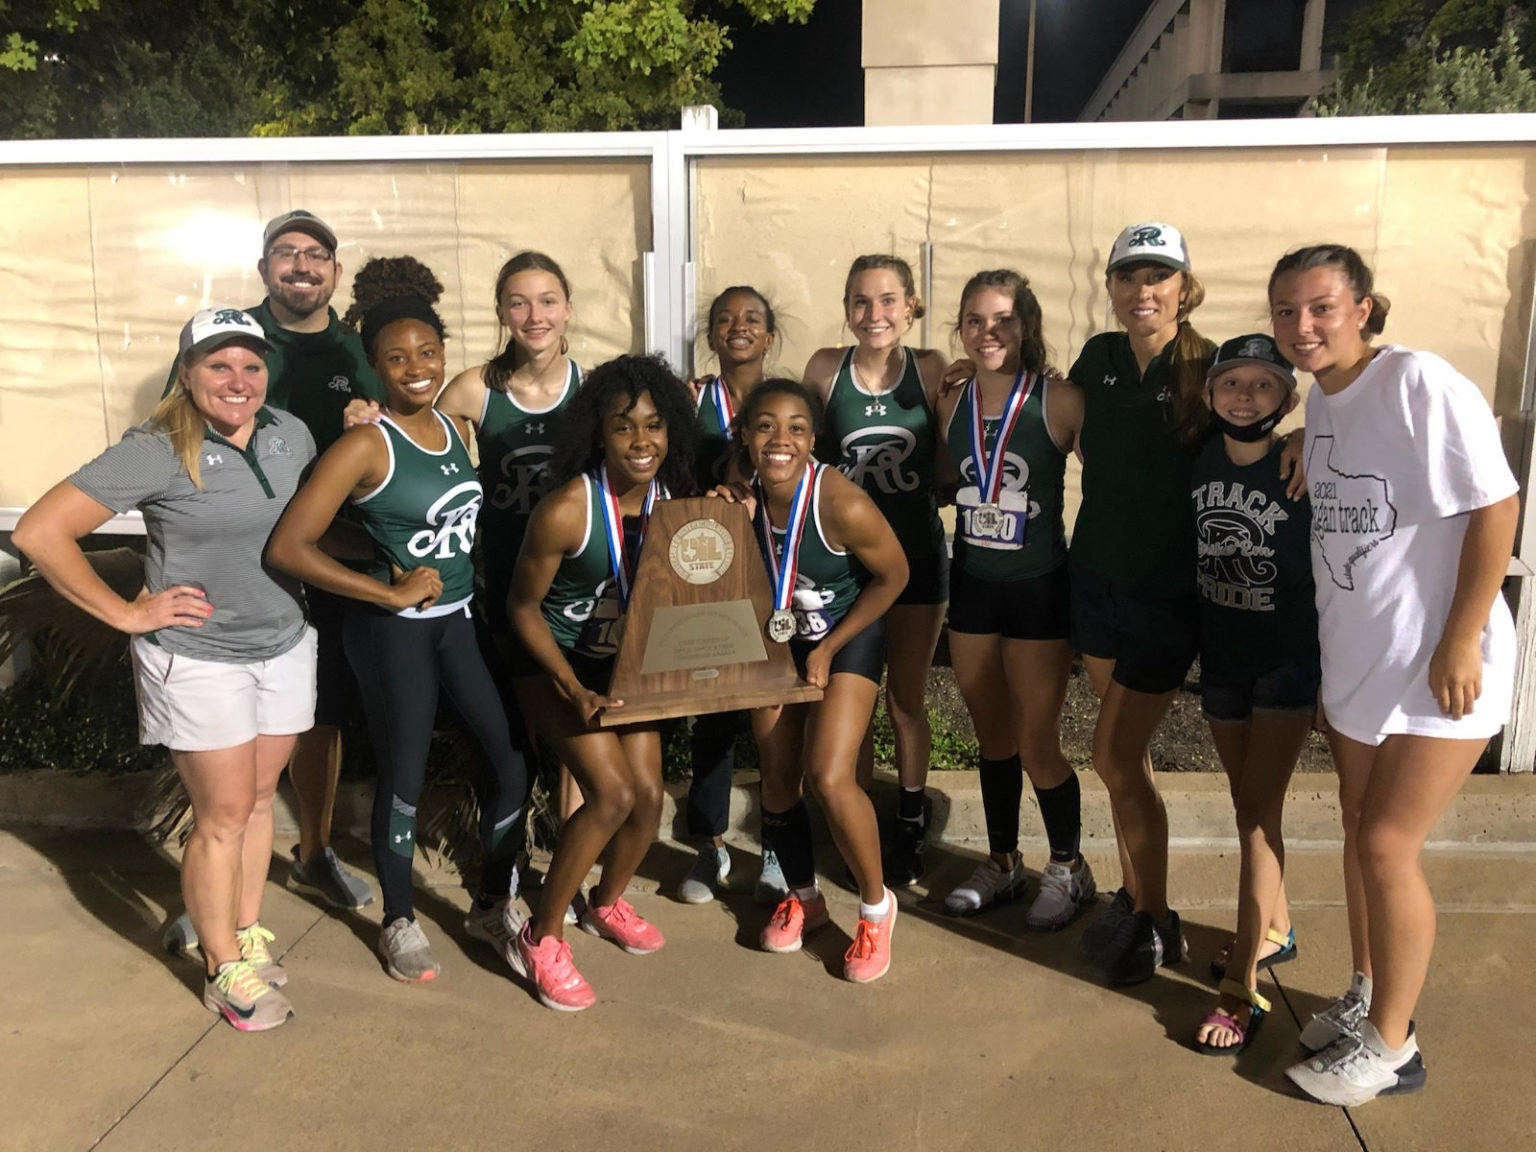 Reagan Girls earn SILVER in the UIL 6A State Track & Field